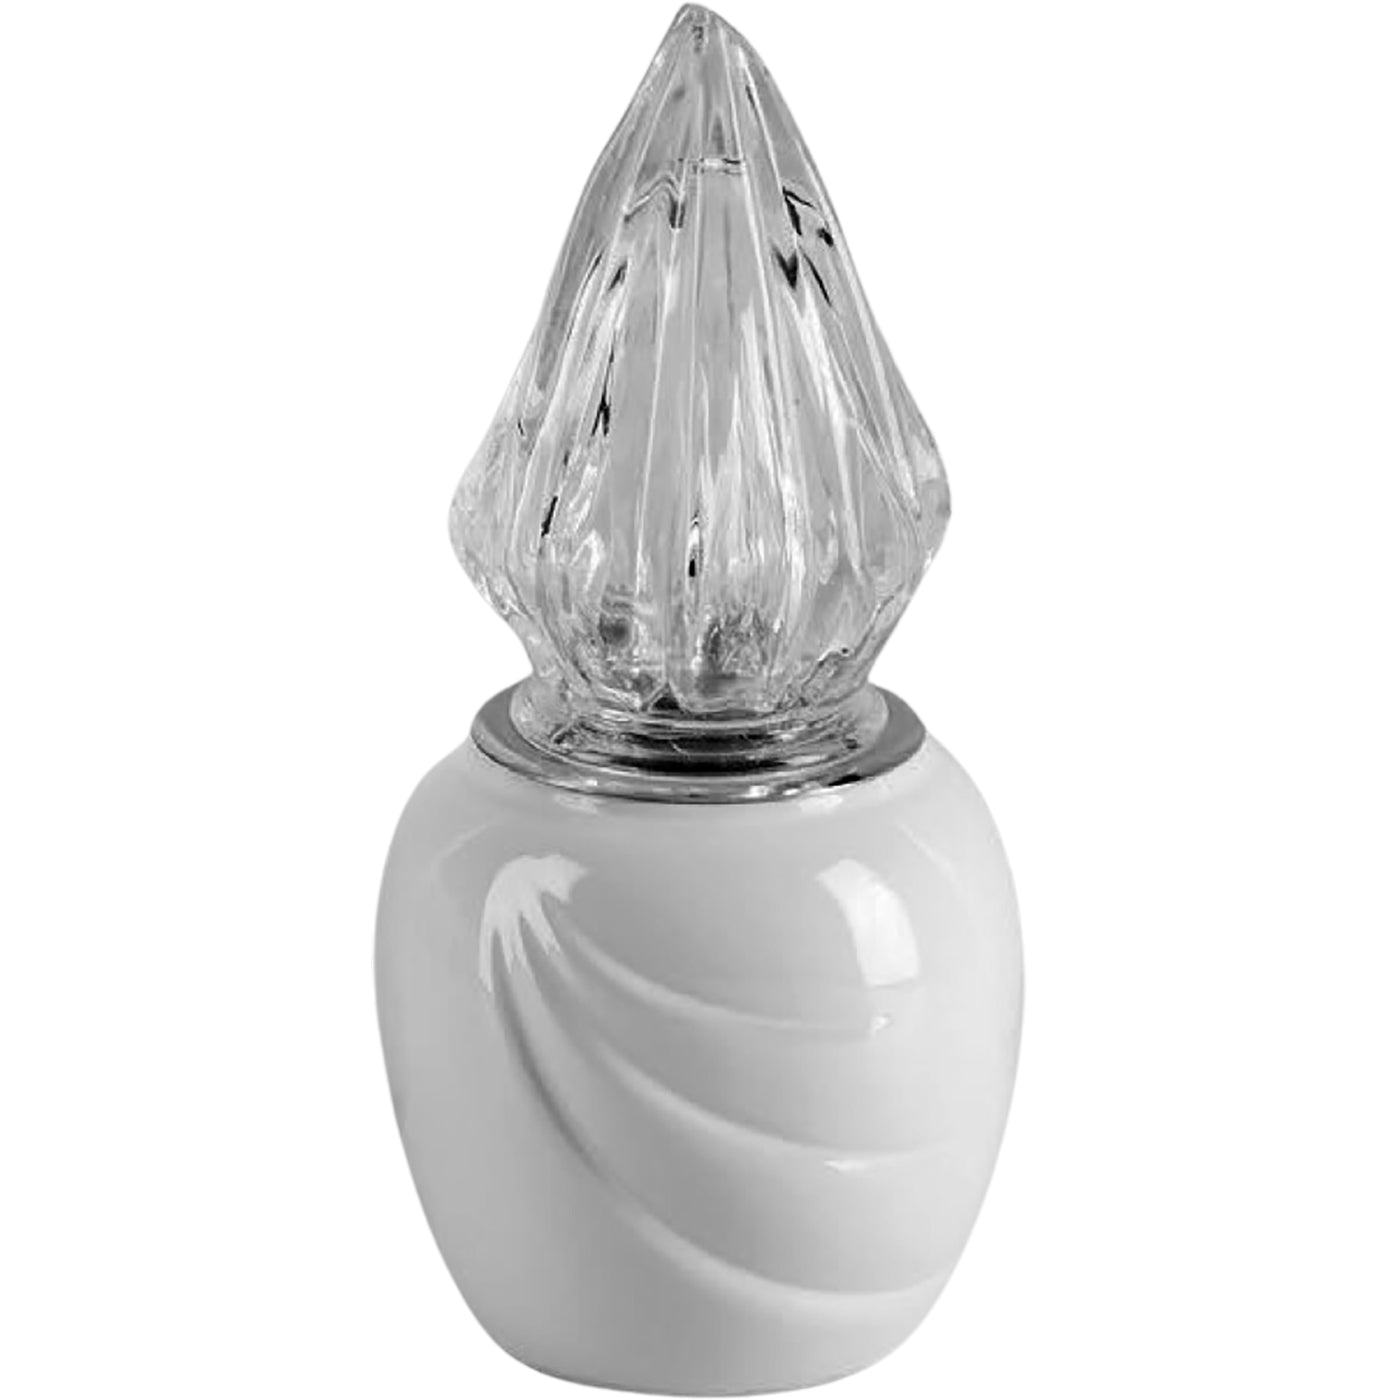 Grave light Ecotre 10x10cm - 3.9x3.9in In white porcelain, ground attached ECO152P